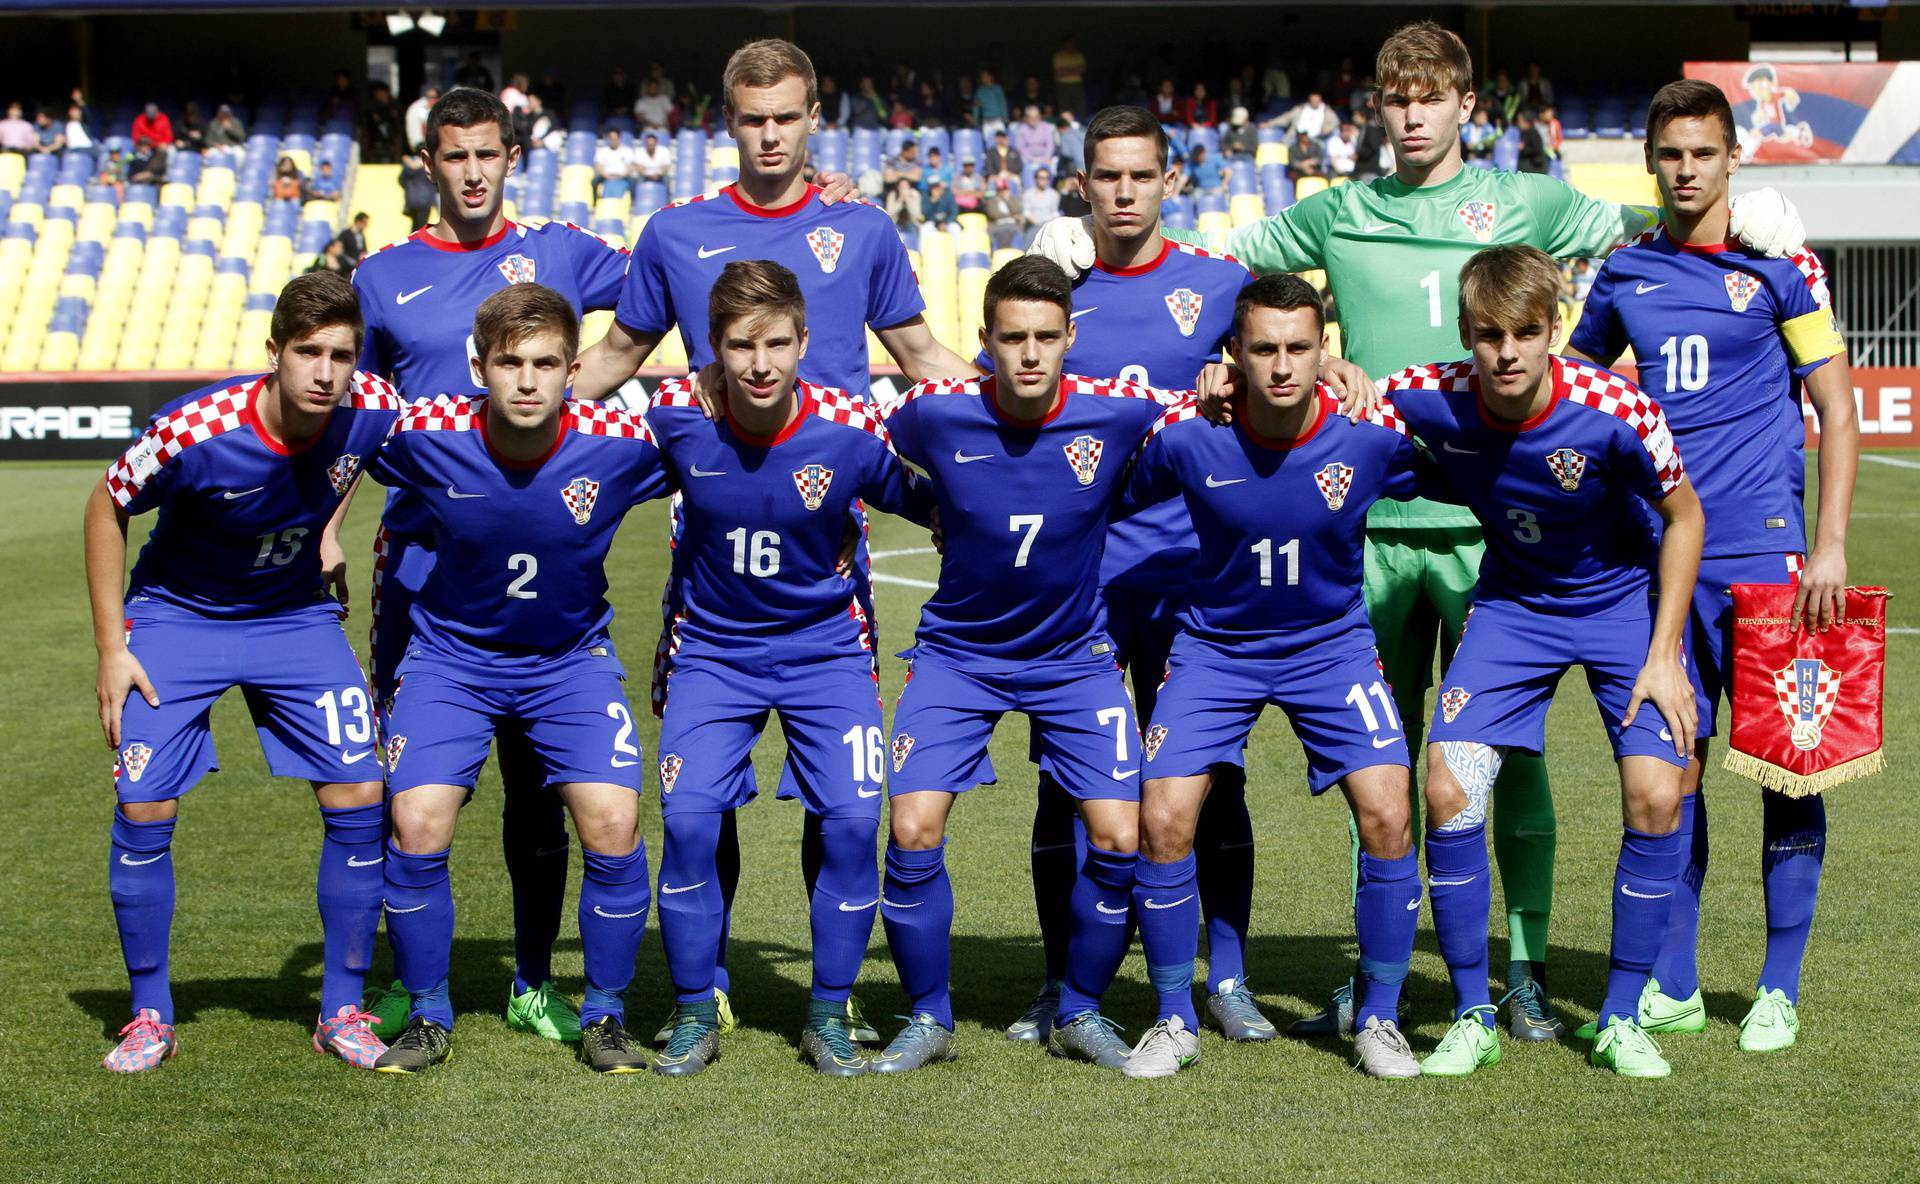 FIFA U 17 World Cup Chile 2015 Croacia s team before round of 16 for FIFA U 17 World Cup 2015 at E